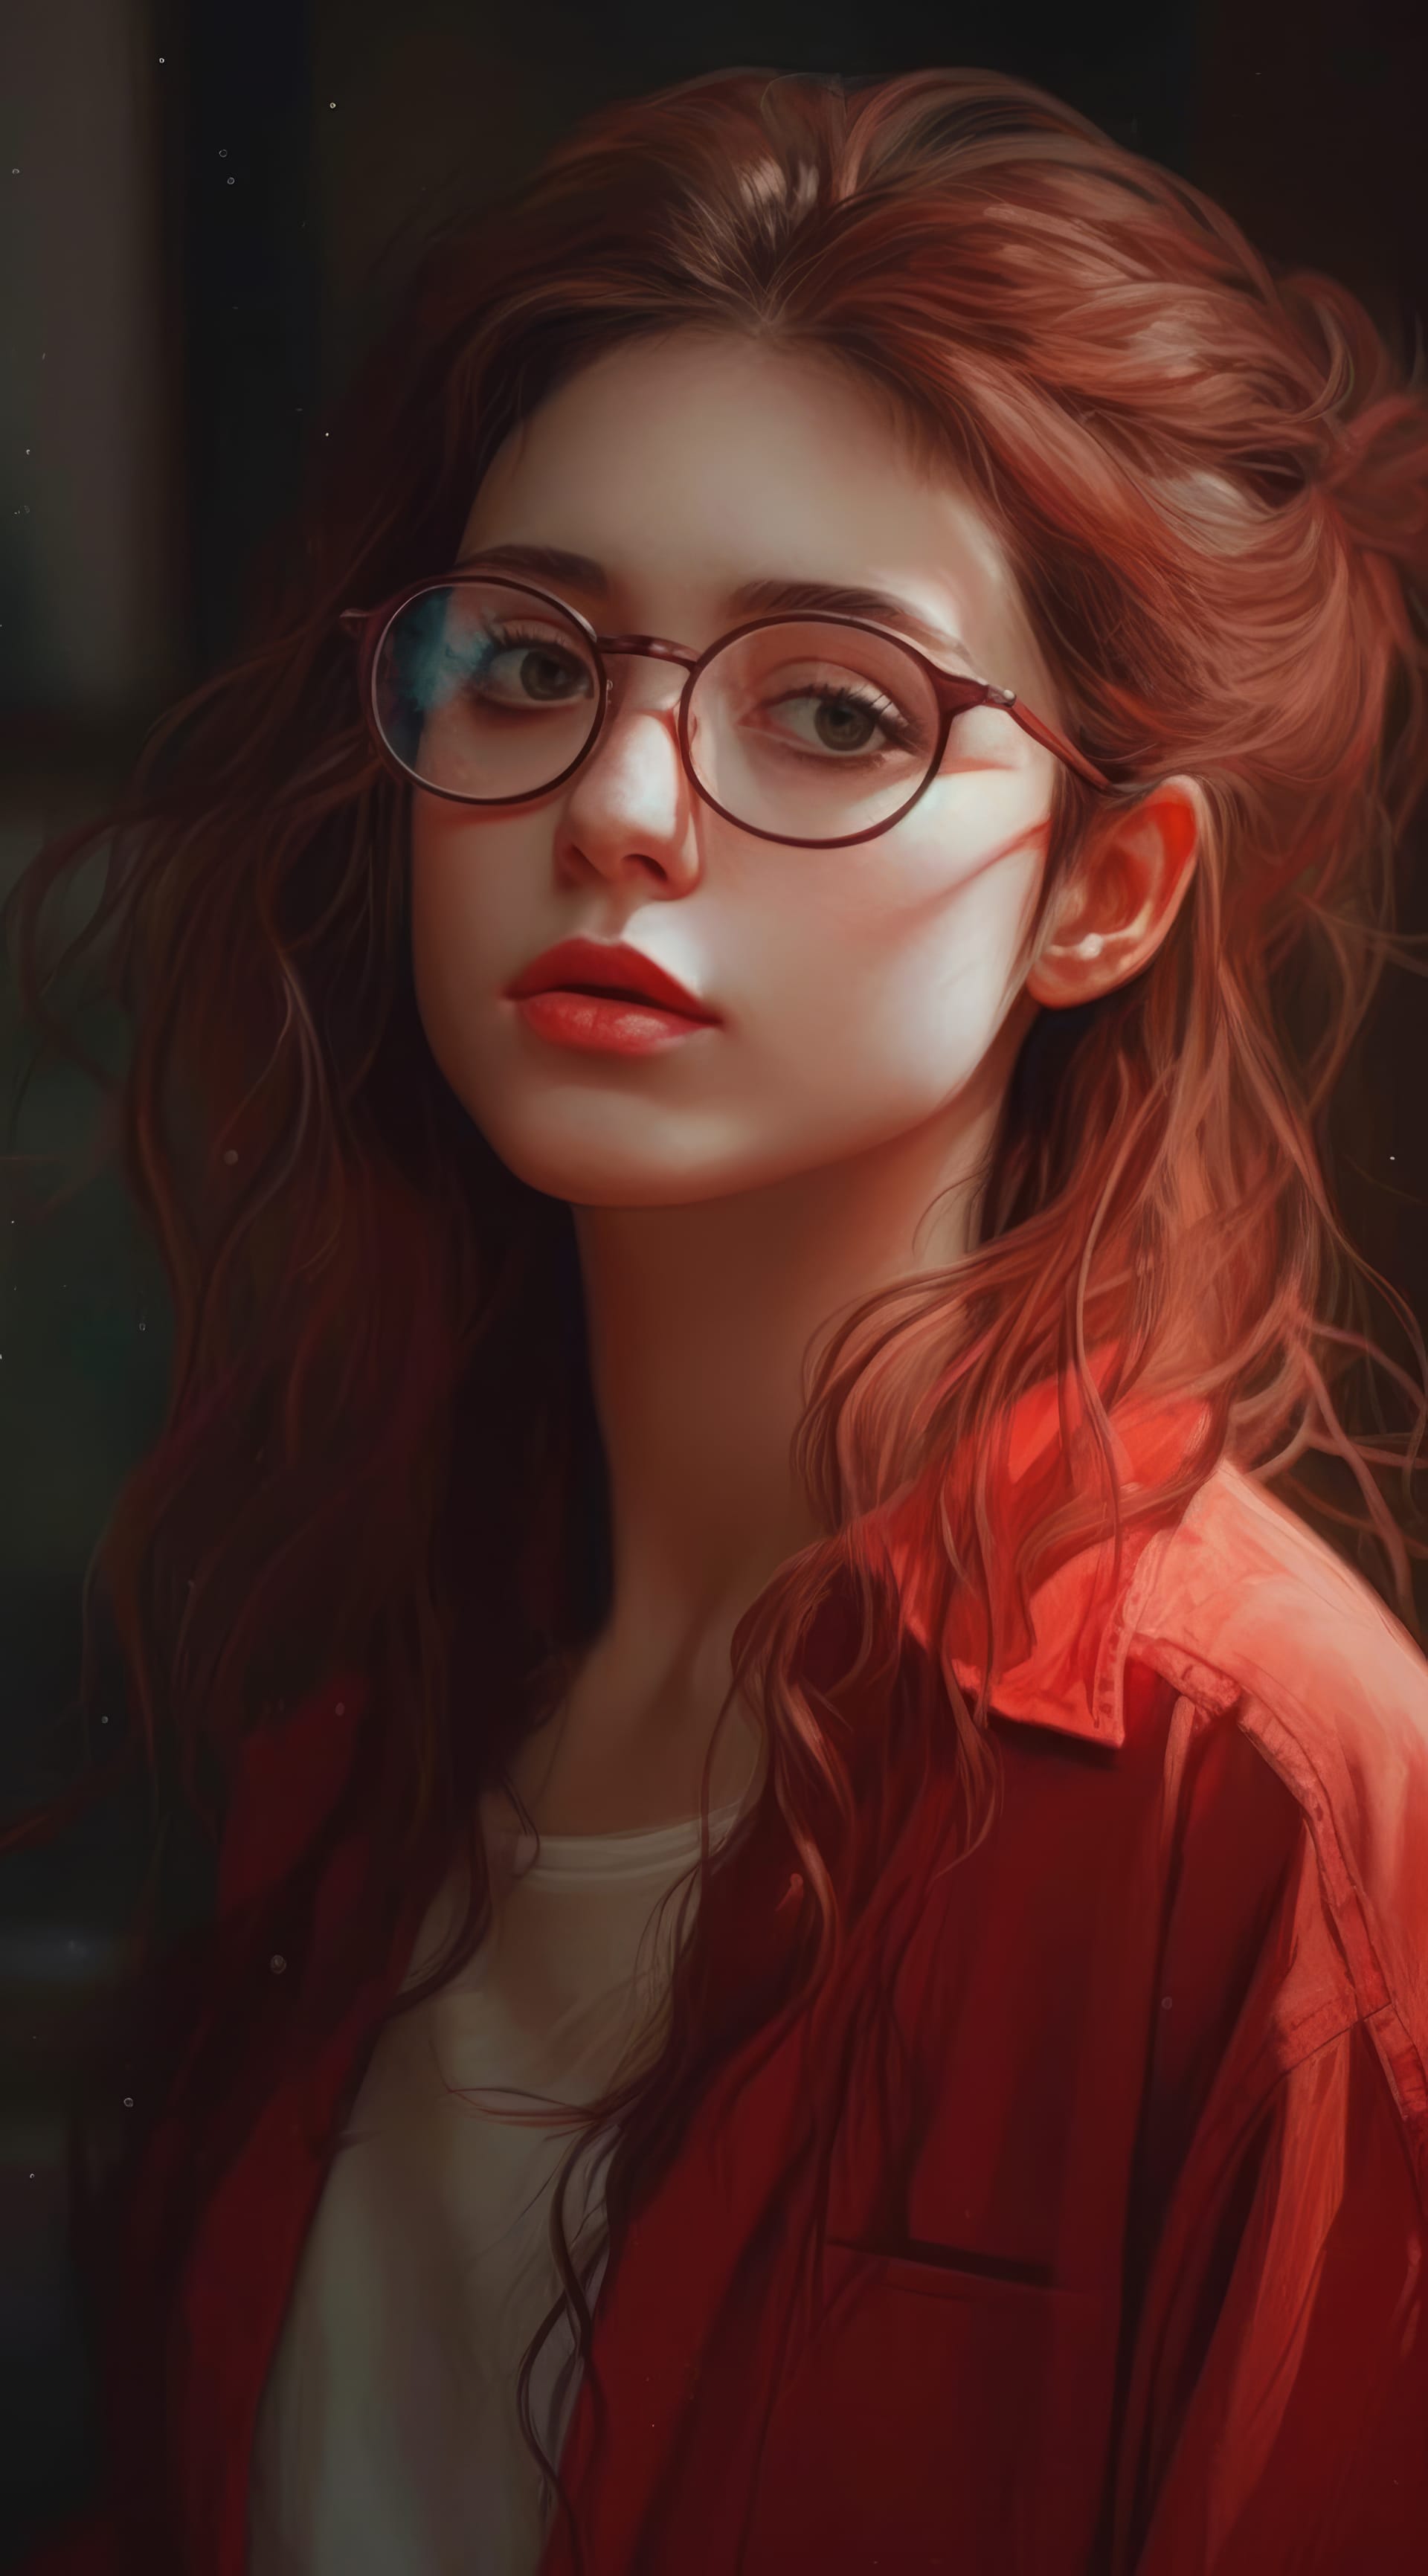 Girl with glasses red shirt free profile picture